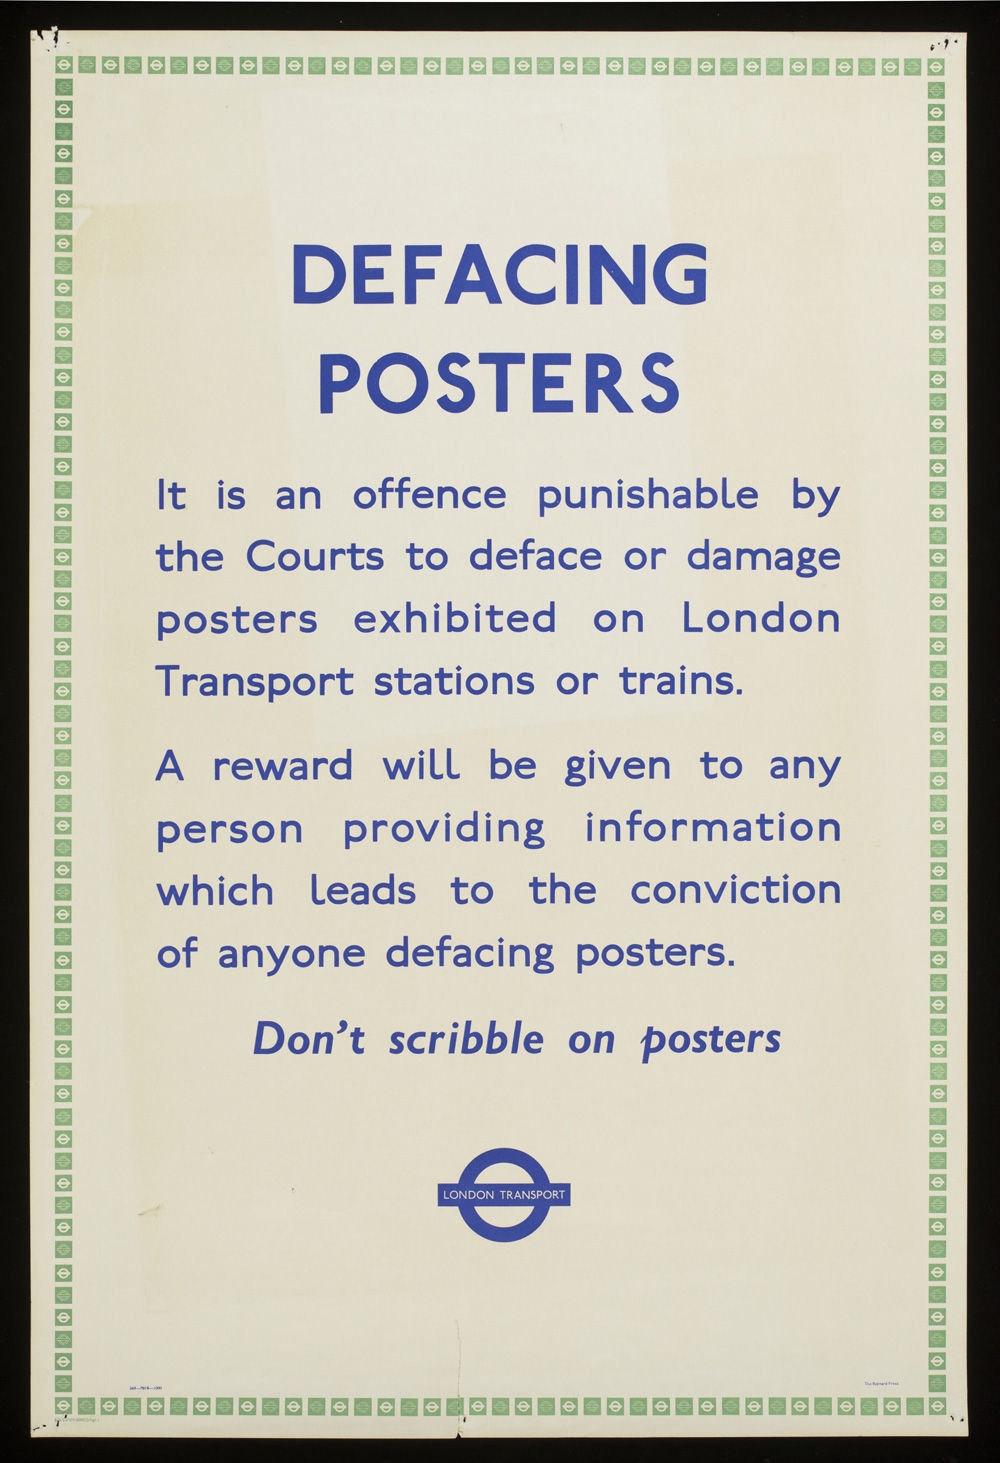 edward-johnston_-defacing-posters_-no-date-_v_amp_a-e-584-1999__-victoria-and-albert-museum_-london_.jpg